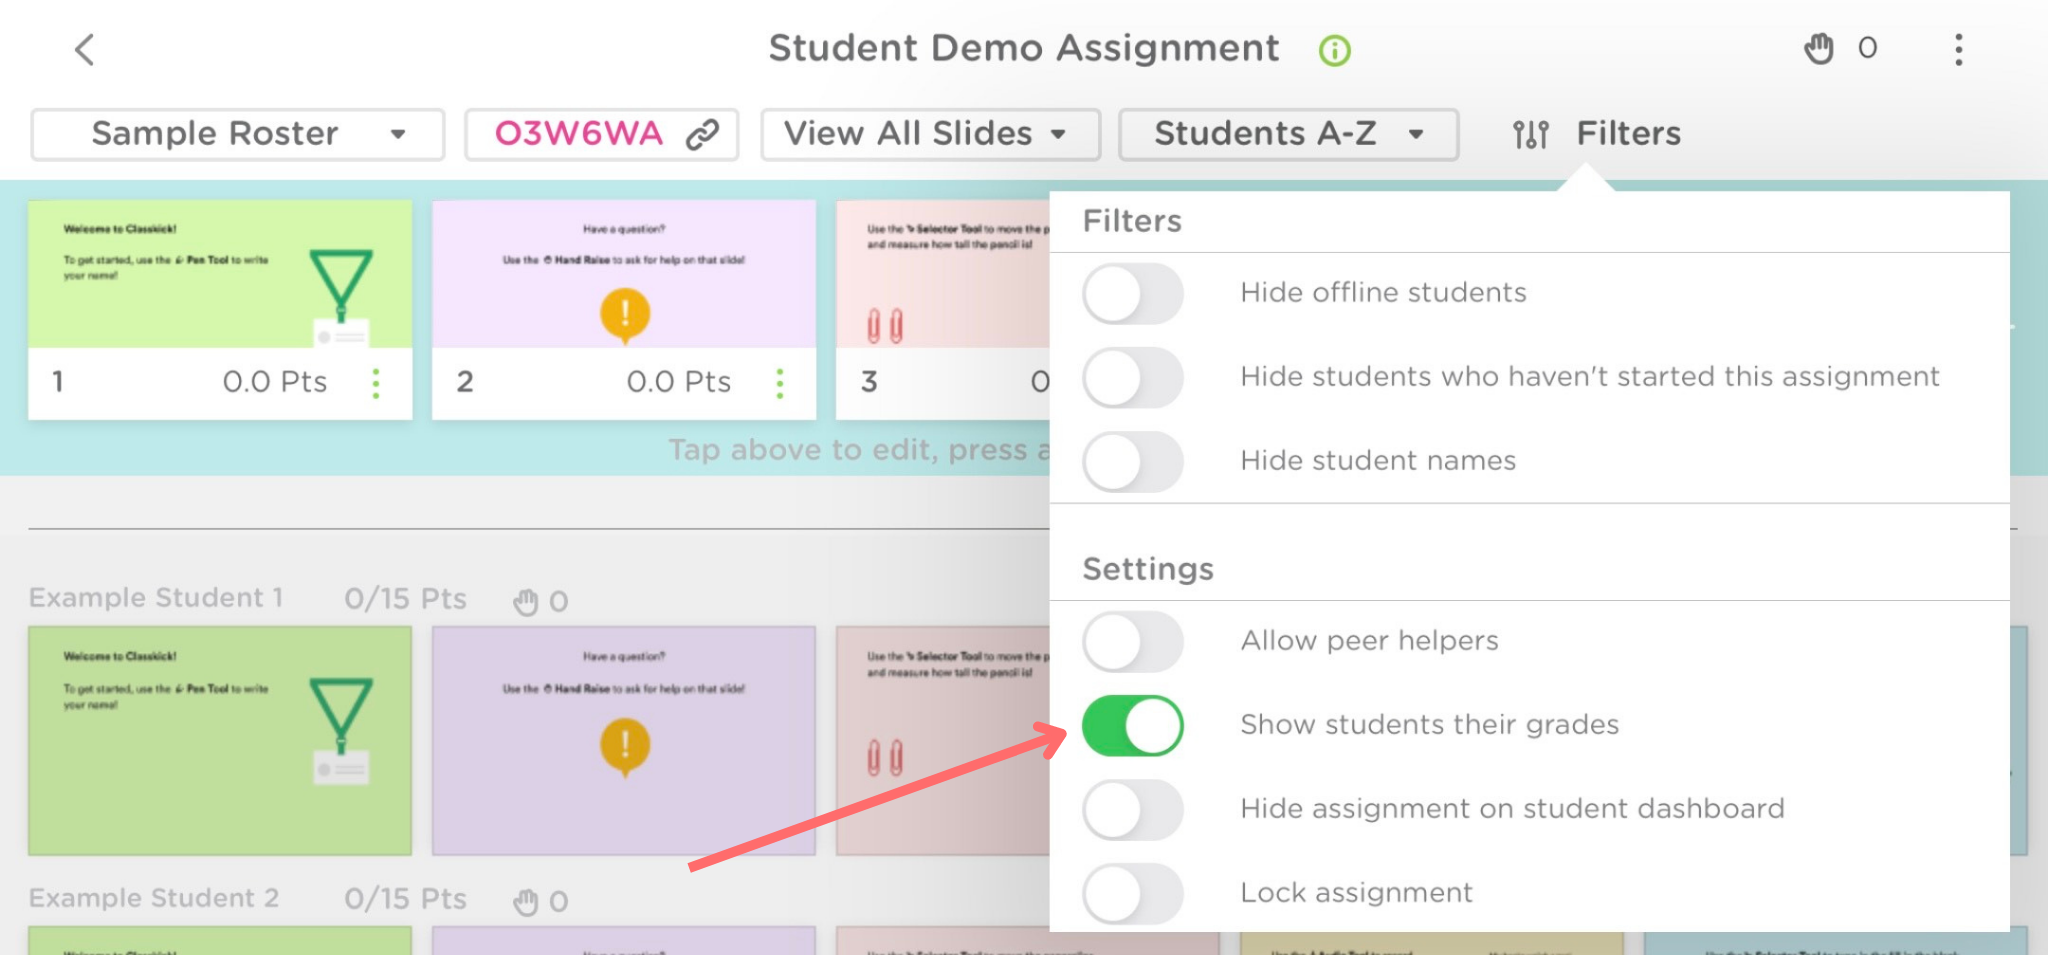 The Assignment view on the Classkick app. A red arrow points to show students their grades, which is toggled on.